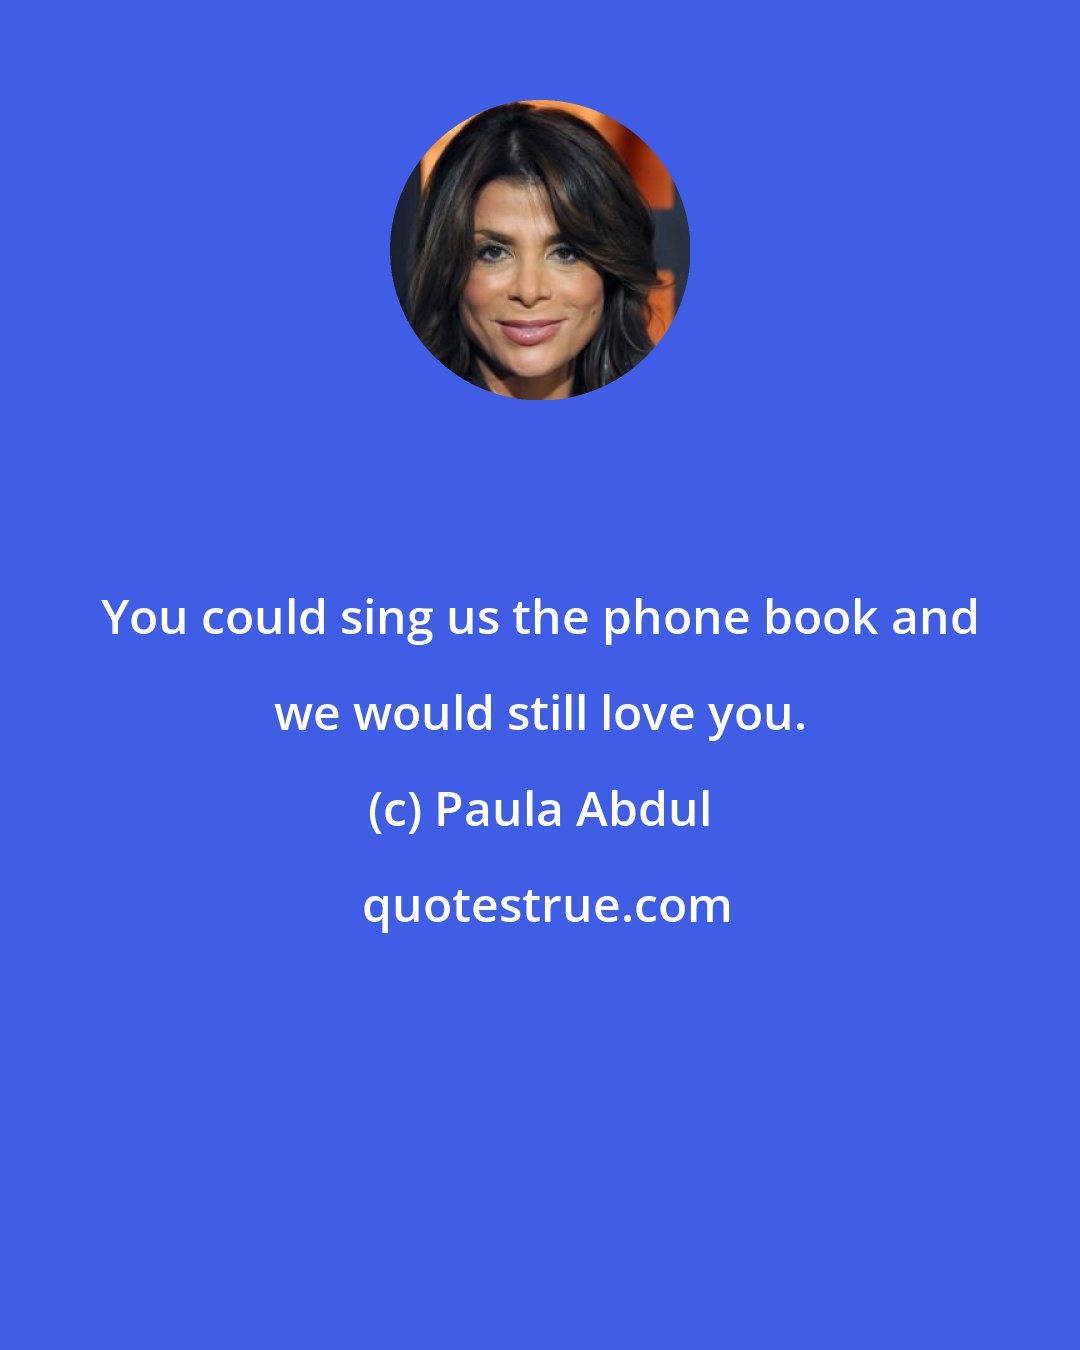 Paula Abdul: You could sing us the phone book and we would still love you.